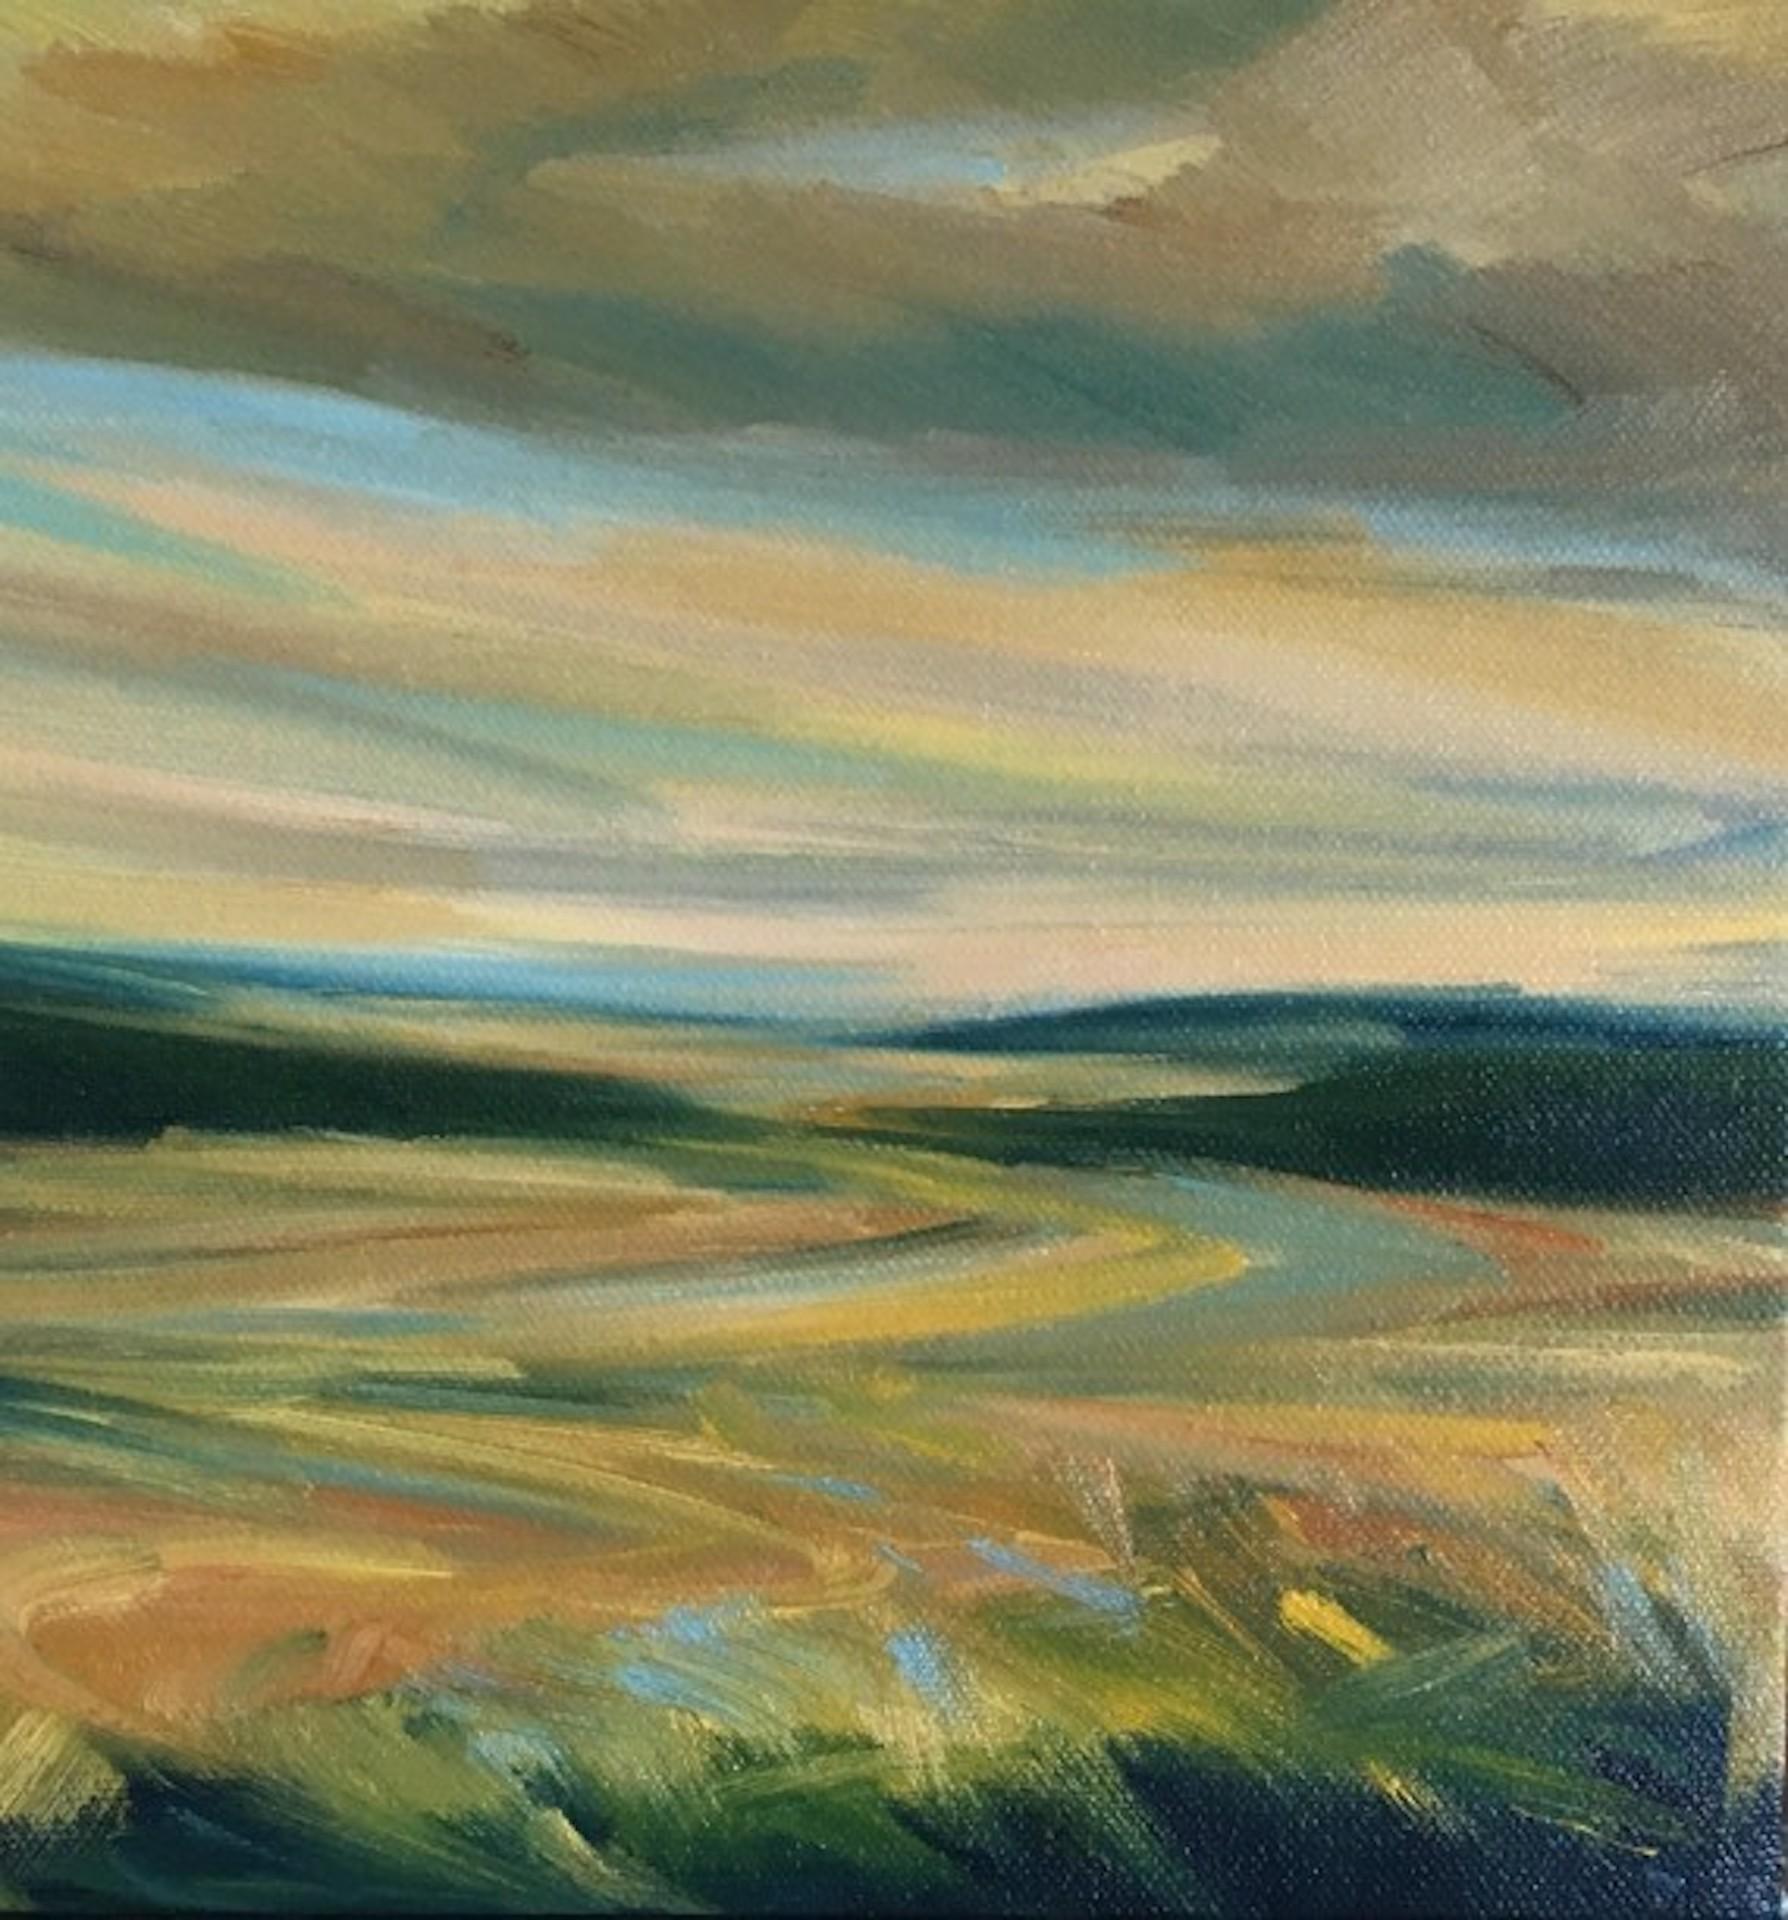 Summer Dreaming [2020]
Original
Landscape
Oil on deep edge canvas
Image Size: H:30 cm x W:30 cm
Framed Size: H:37 cm x W:37 cm x D:5cm
Sold Framed
Please note that insitu images are purely an indication of how a piece may look

This painting was